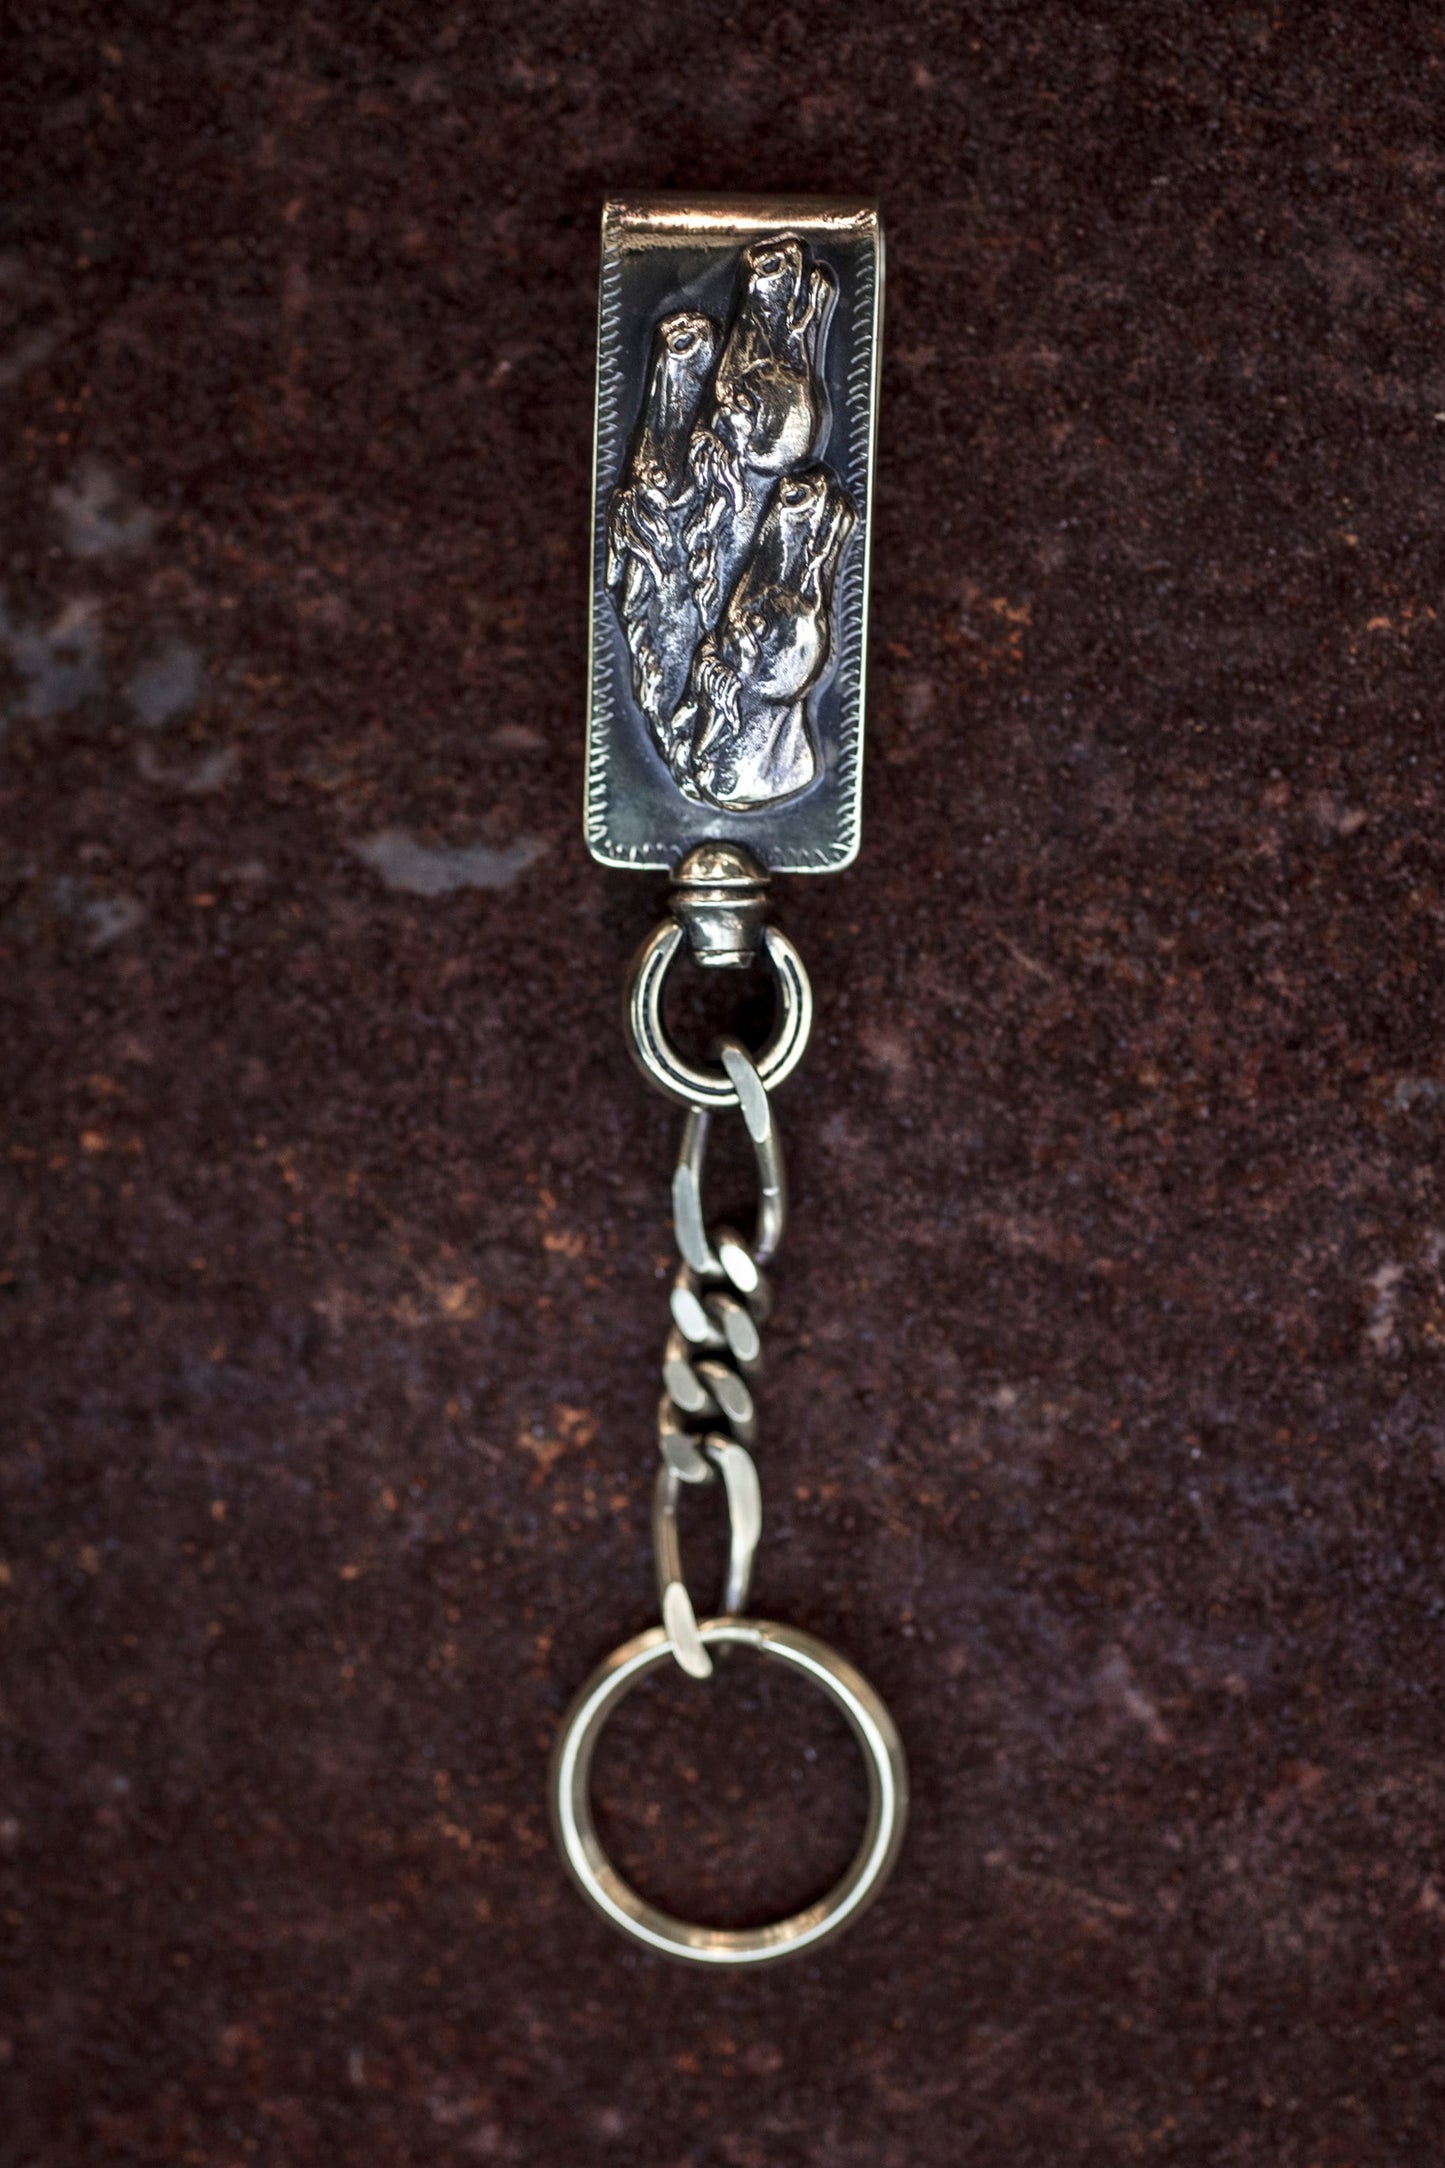 Peanuts&Co horse clip type keychain brass